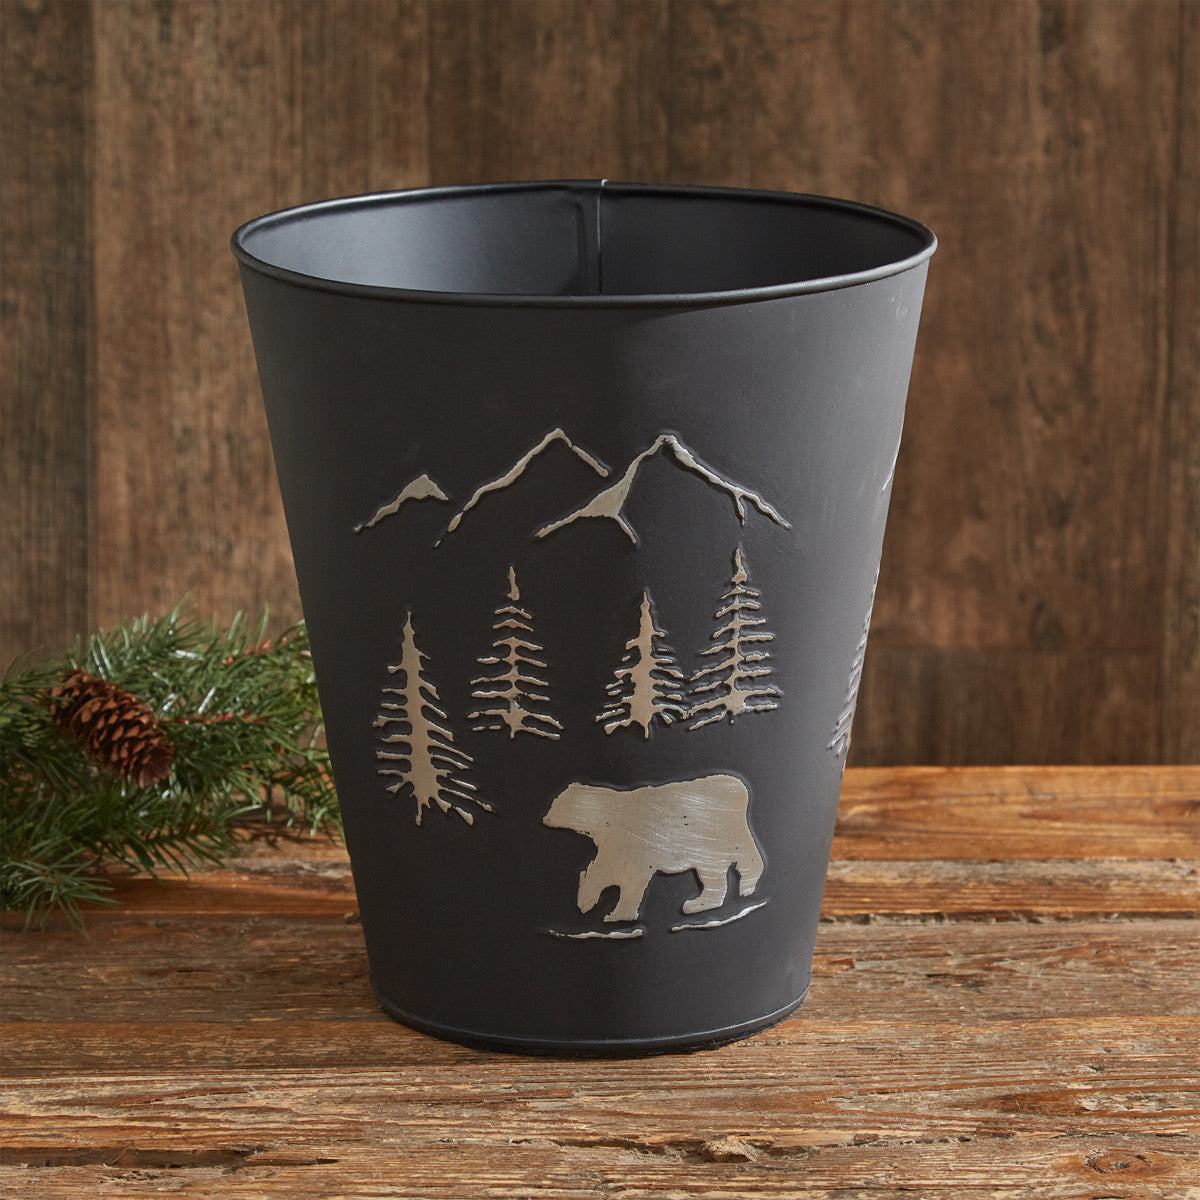 Park Designs Black Bear Waste Basket Classy Embossed Decorative OUT OF STOCK